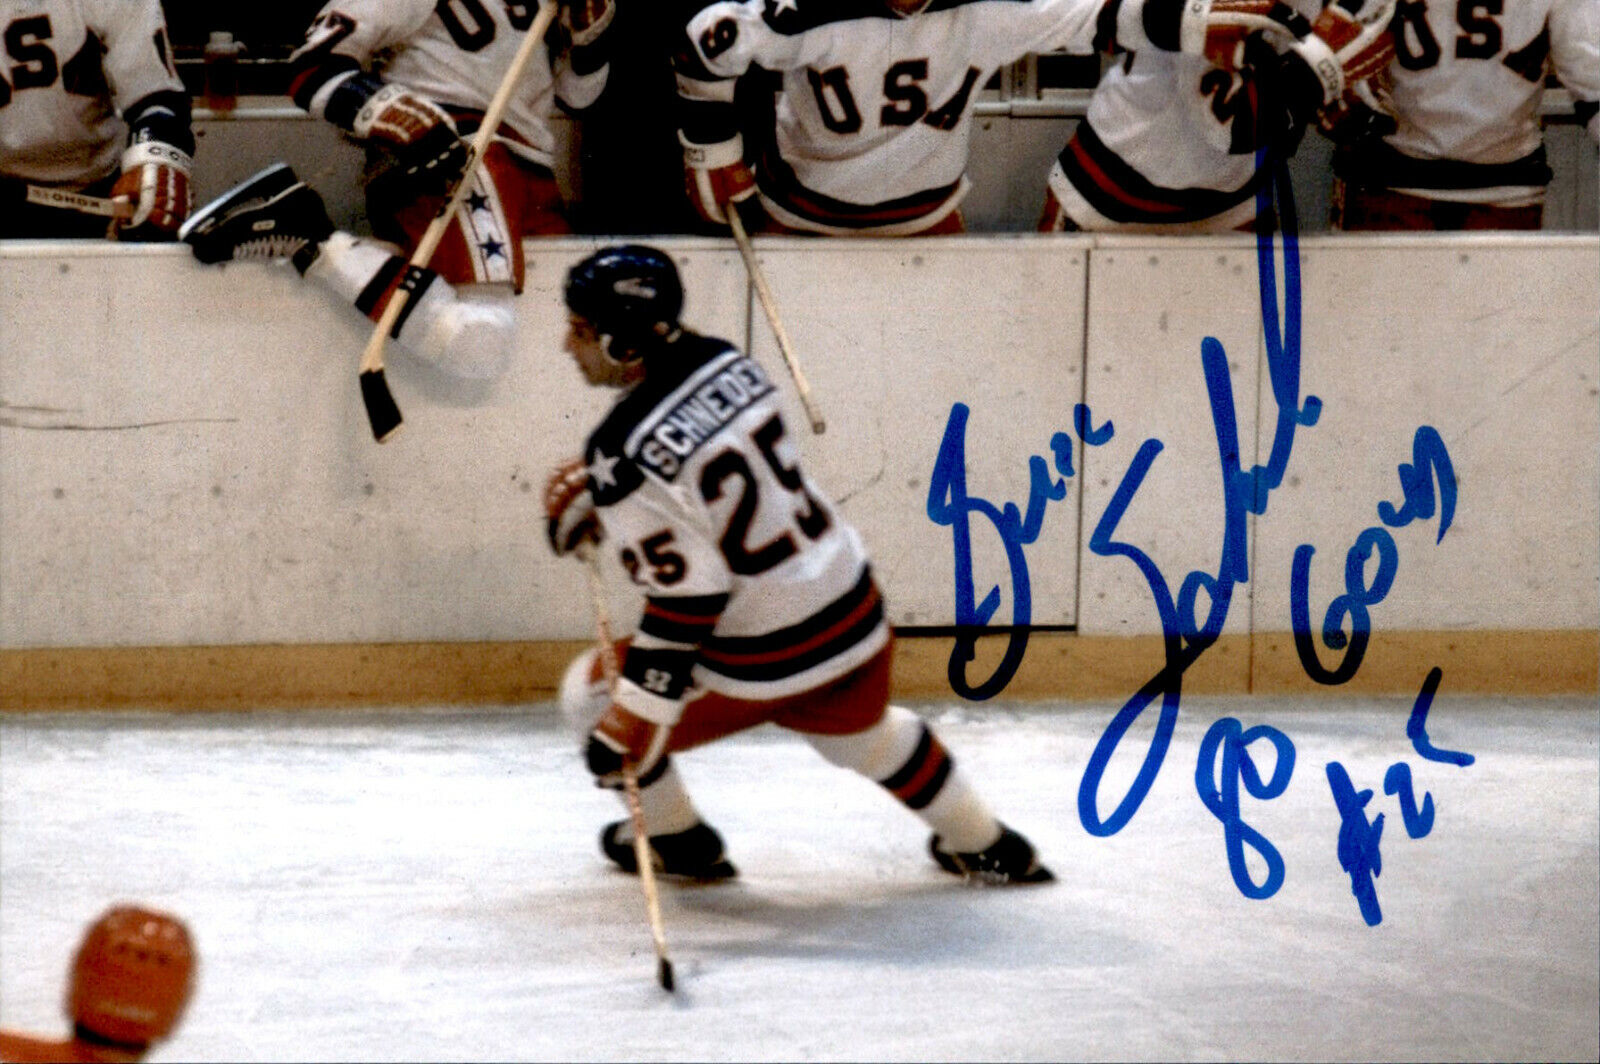 Buzz Schneider SIGNED autographed 4x6 Photo Poster painting 1980 TEAM USA MIRACLE ON ICE